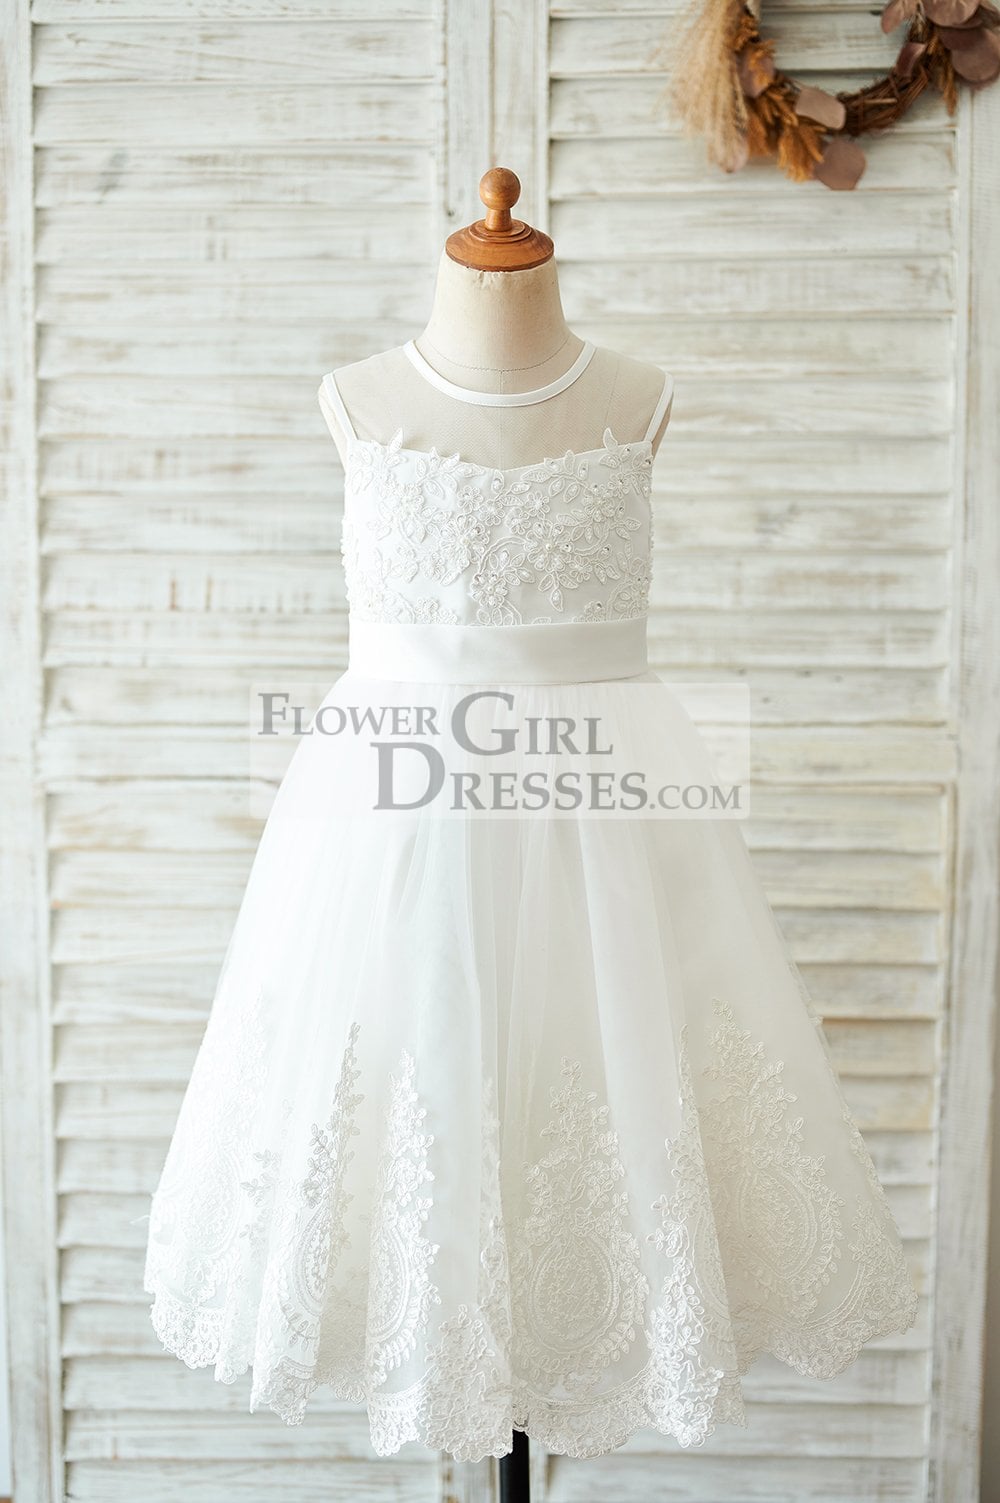 Ivory Lace tulle Wedding Flower Girl Dress with bows